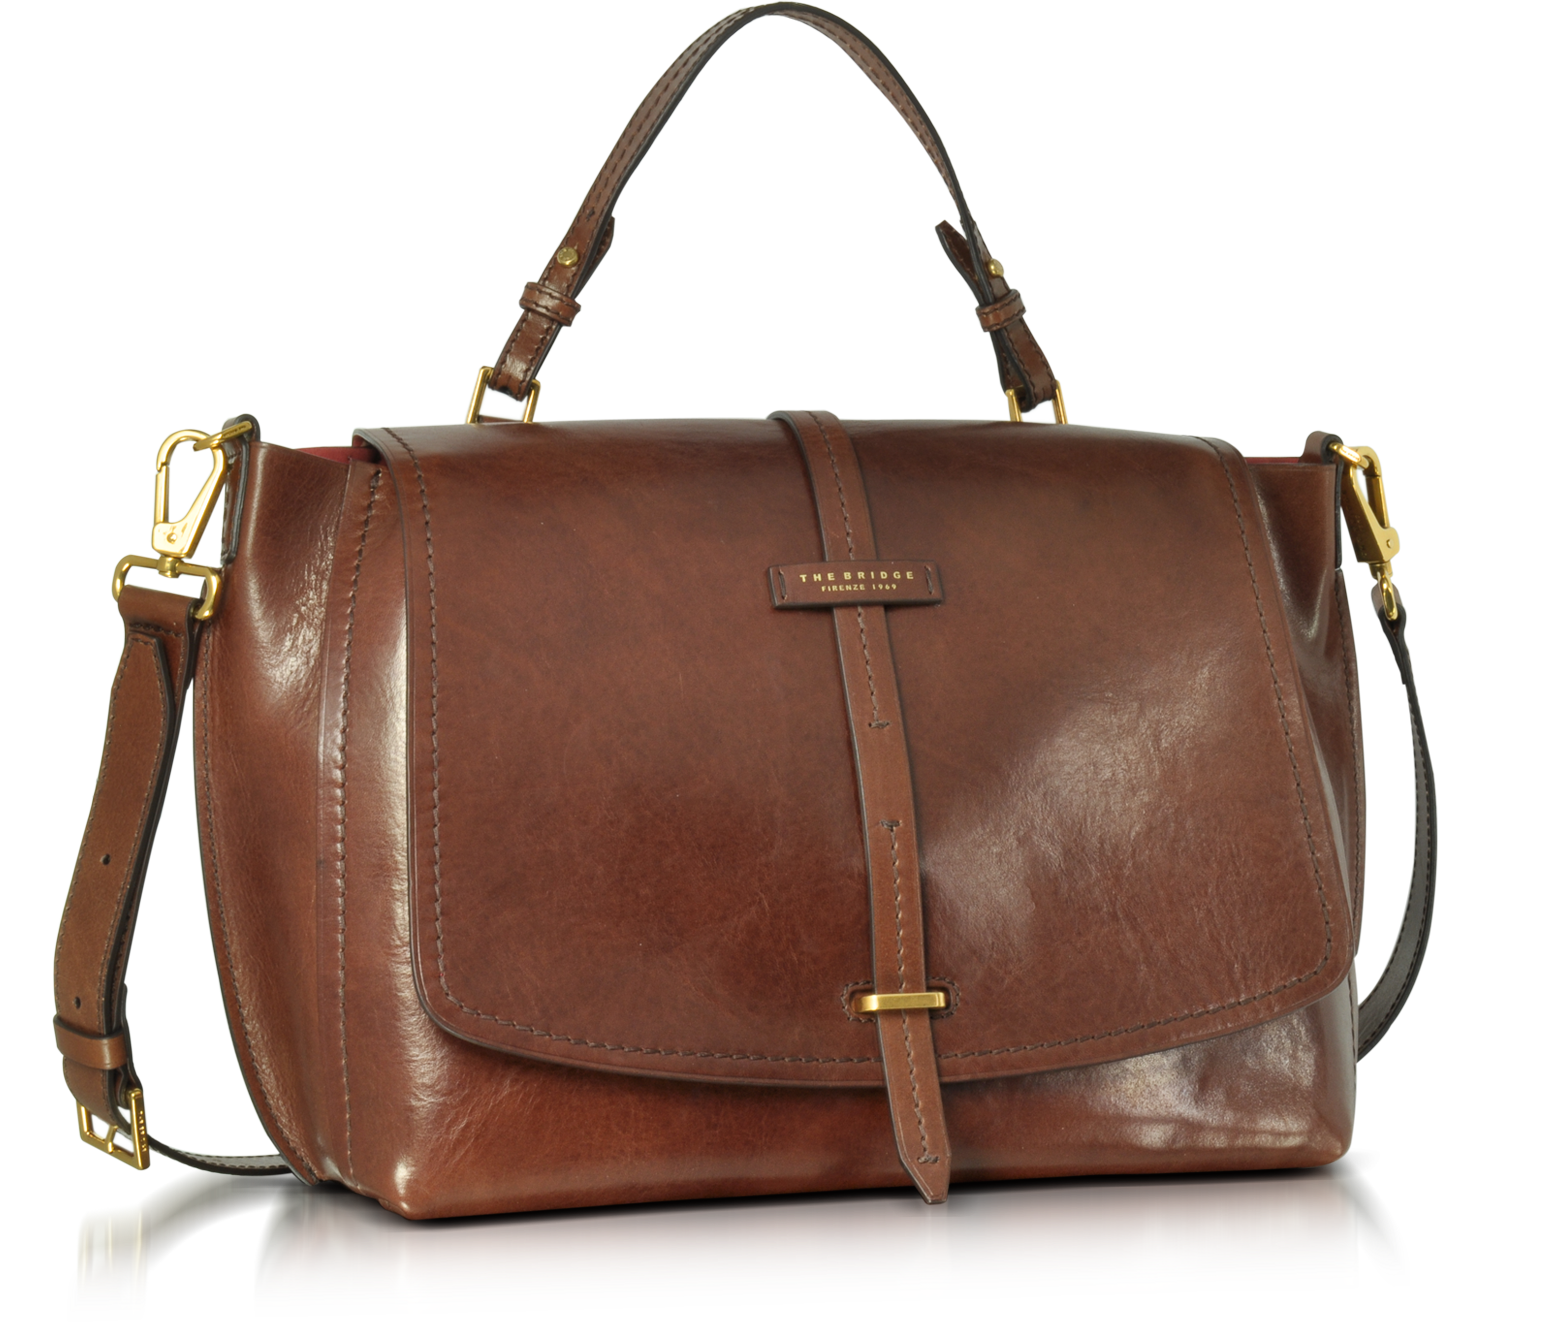 The Bridge Brown Leather Dual Function Oversized Satchel Bag at FORZIERI